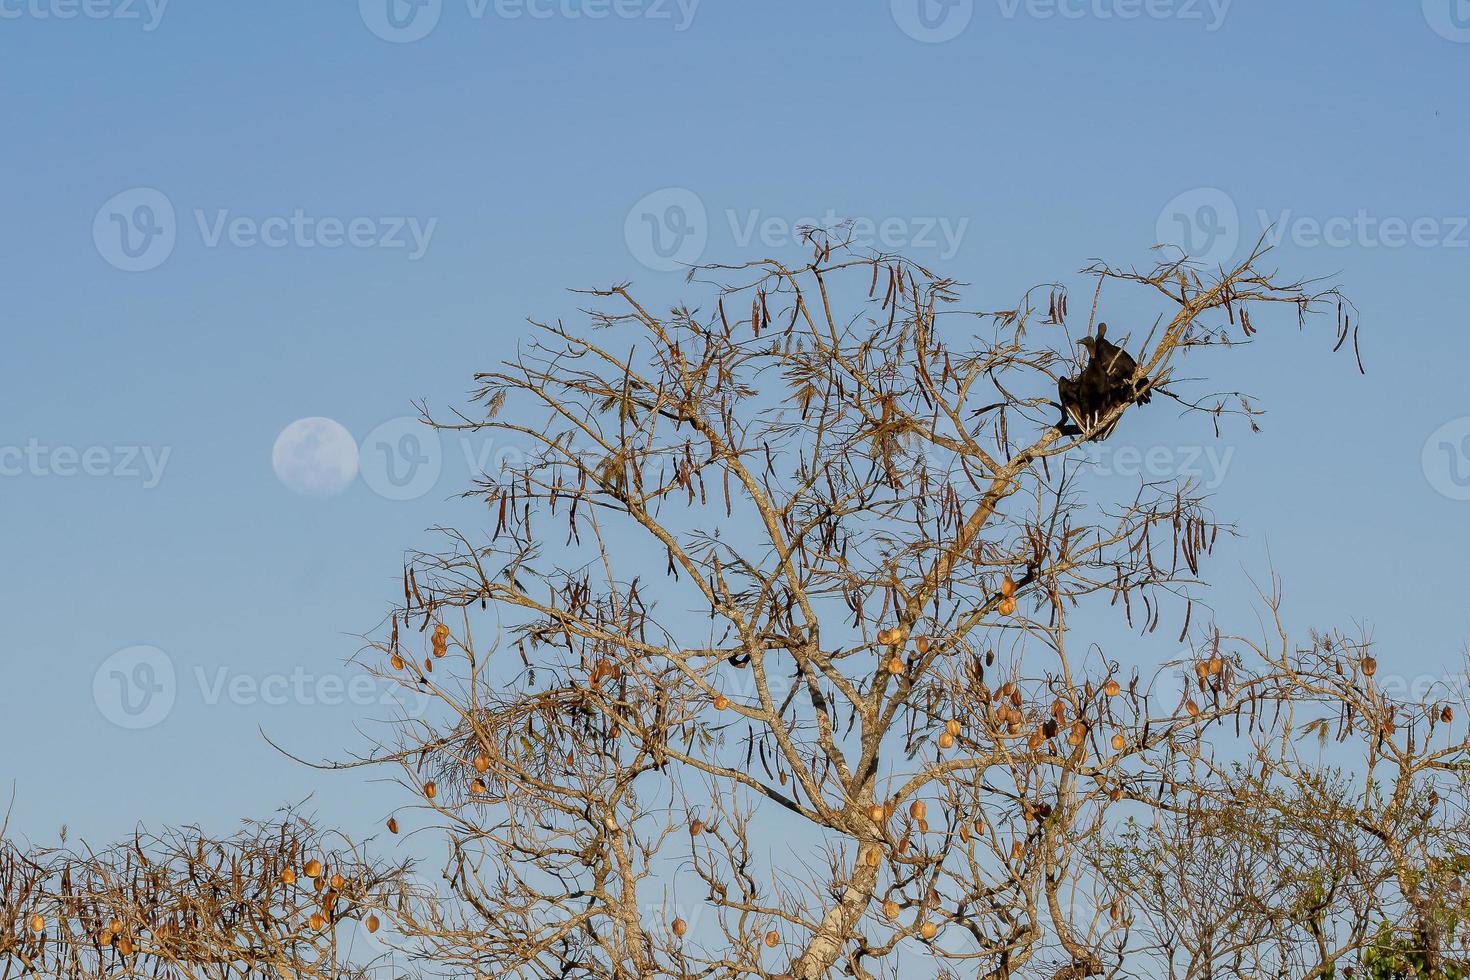 Fabaceous tree with two Black Vulture photo